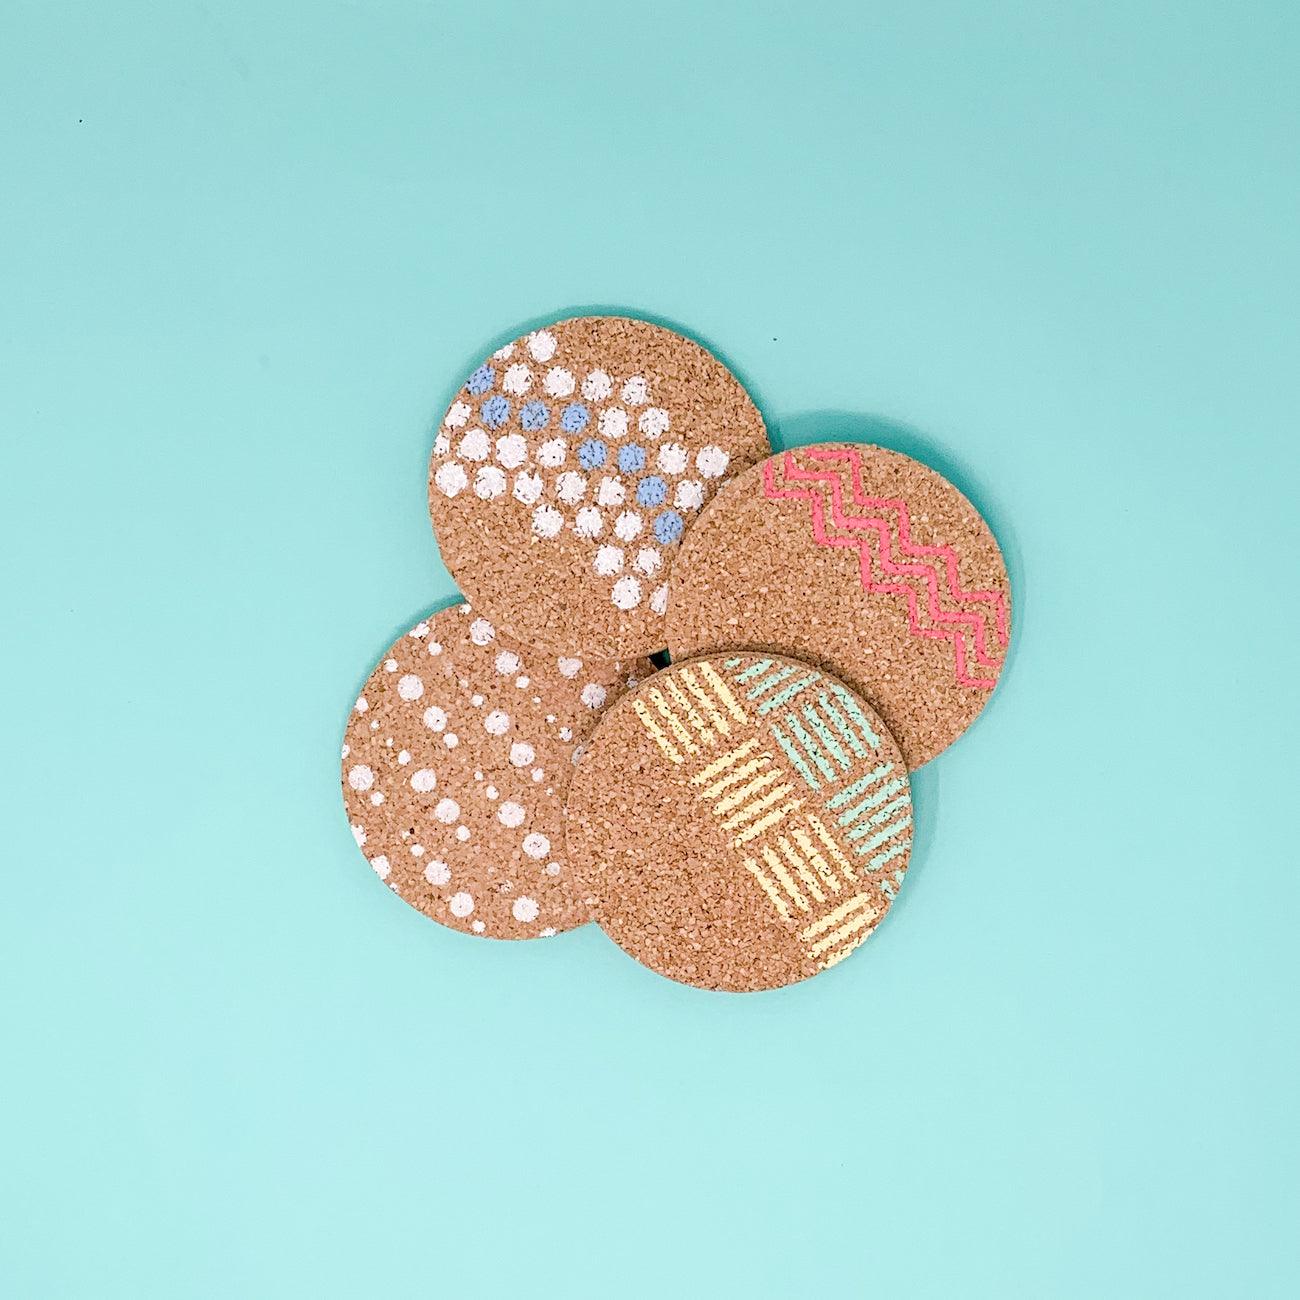 Decorate your cork coaster set with chalk or paint, to create your uniqu gift for family and friends.